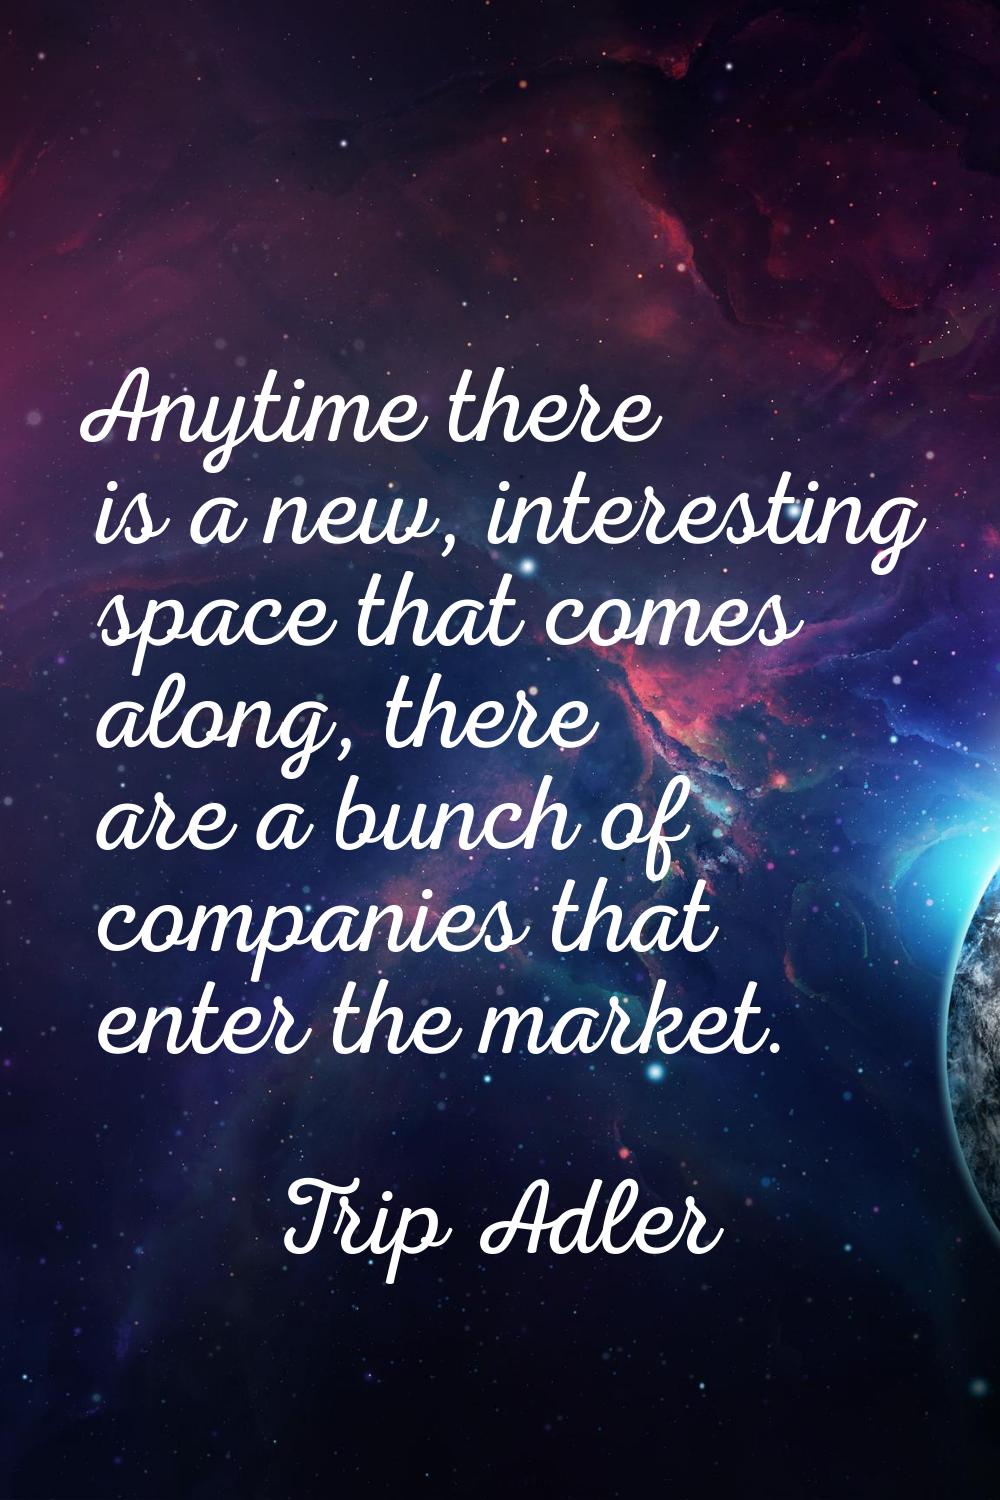 Anytime there is a new, interesting space that comes along, there are a bunch of companies that ent